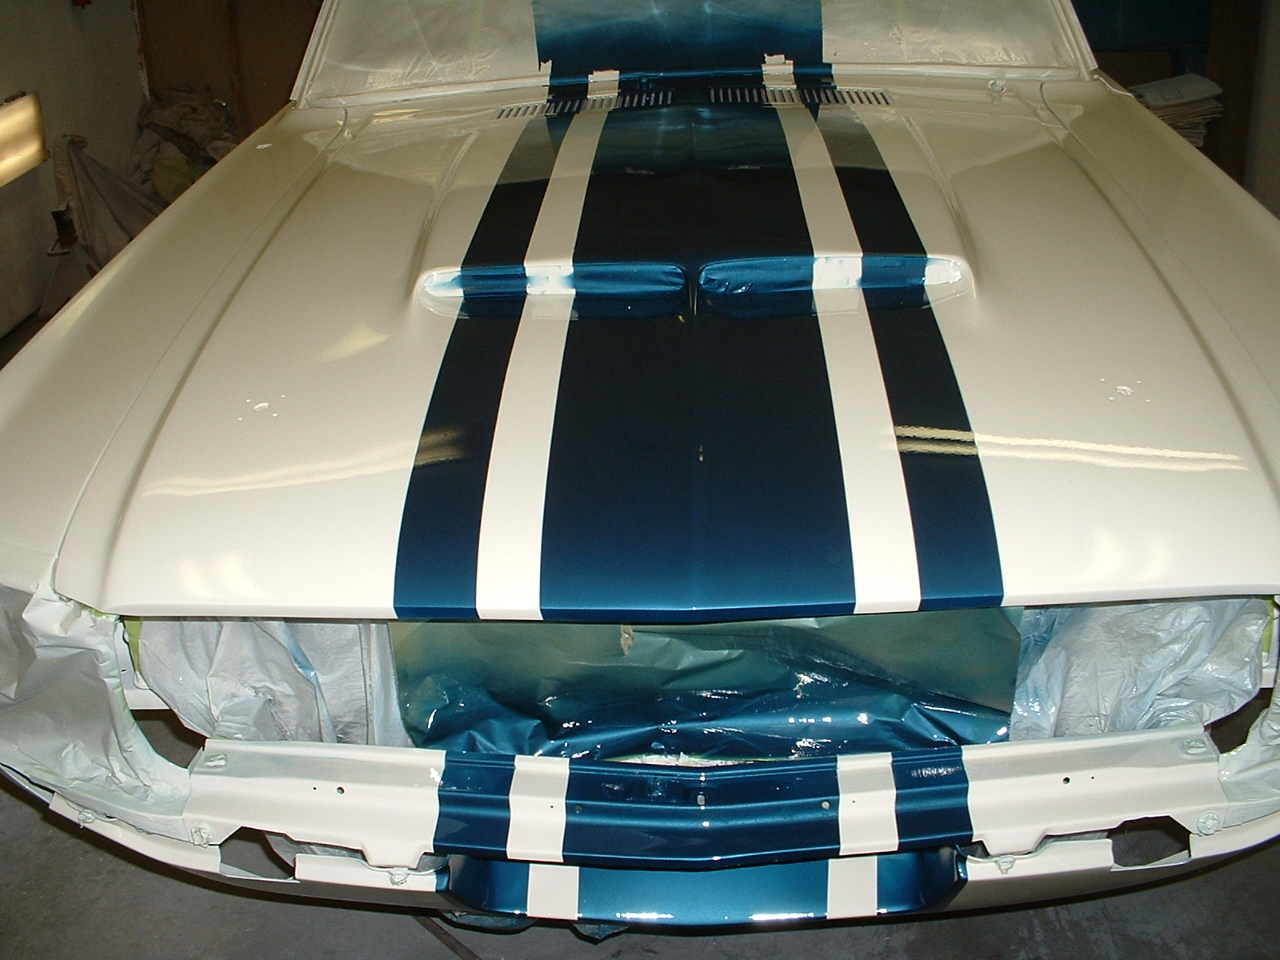 68_fastback_427_paint_036